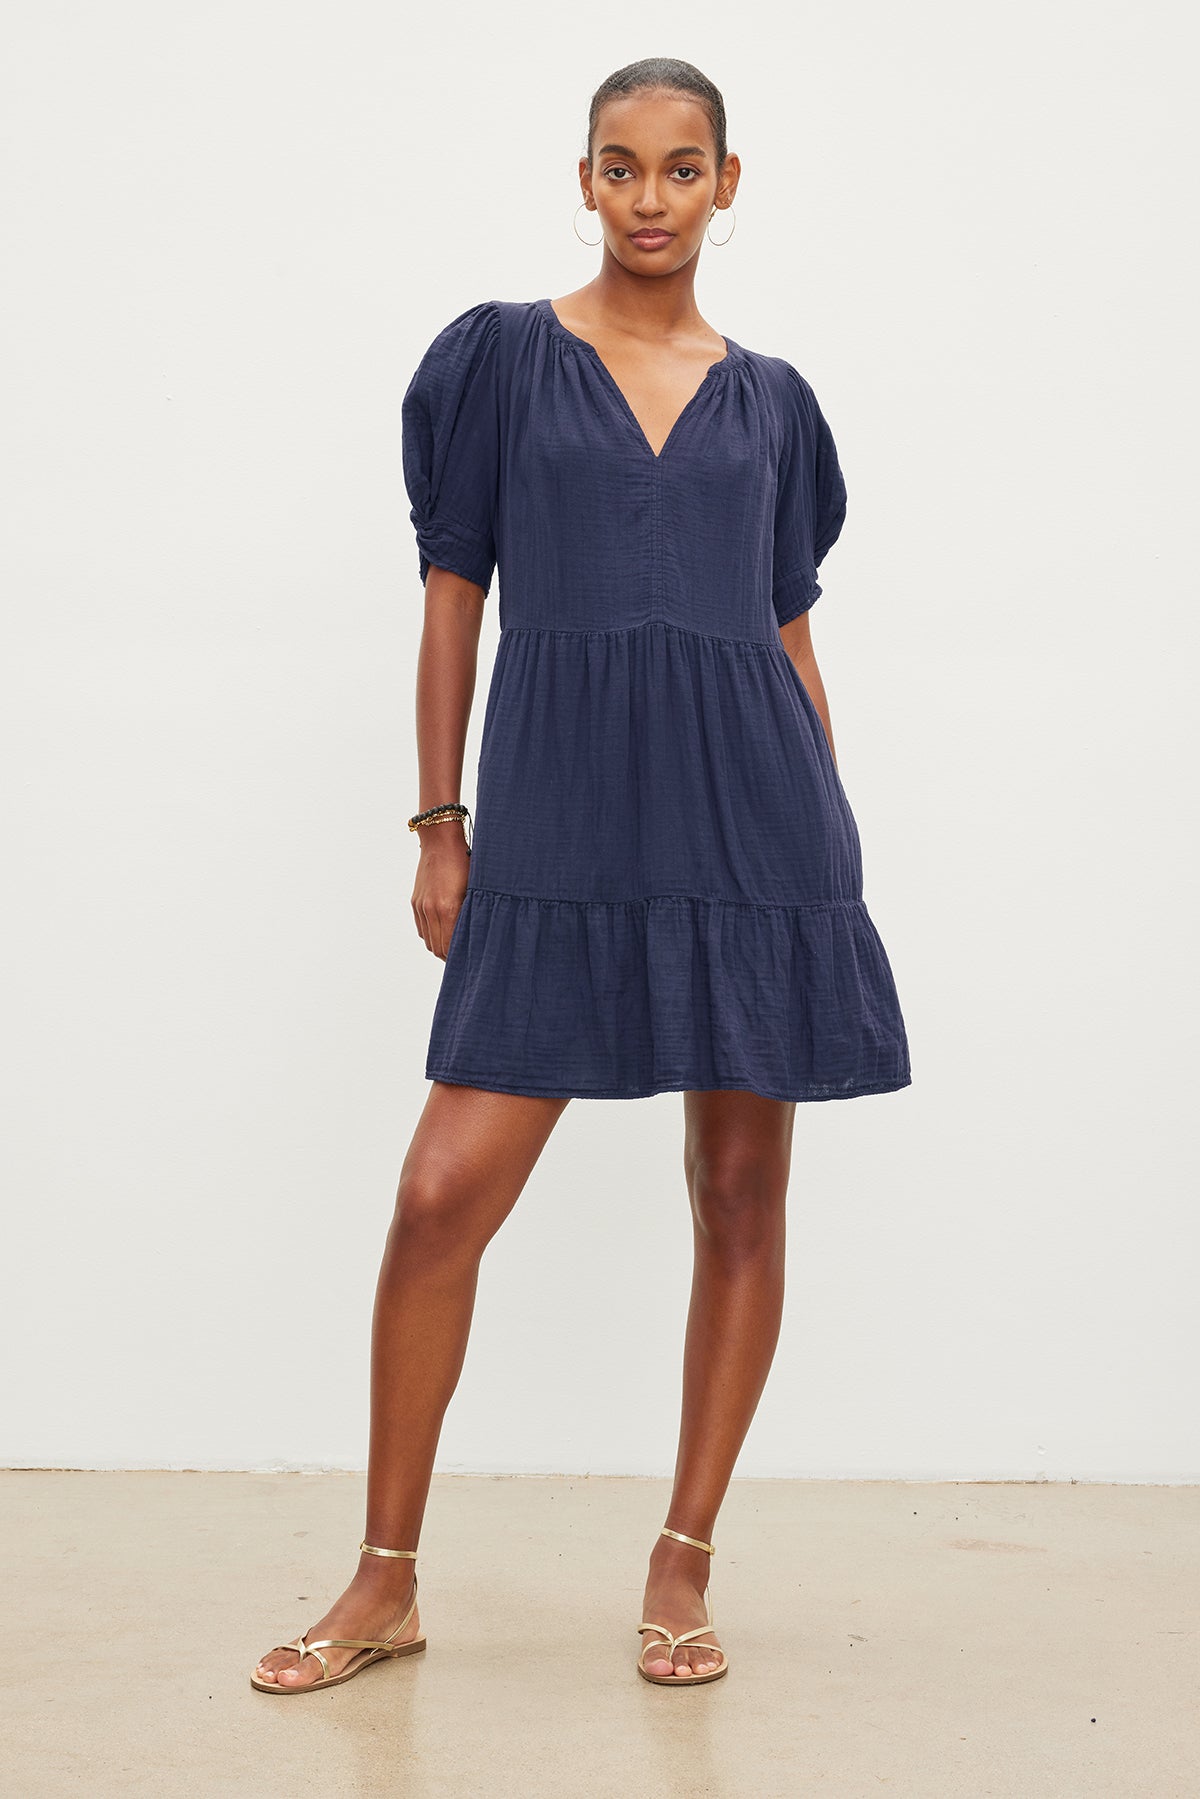 A person stands against a plain white background, wearing a navy blue knee-length BELLA COTTON GAUZE DRESS with short puff sleeves and gold sandals. The v-neckline dress by Velvet by Graham & Spencer features a detachable belt, adding versatility. They are looking directly at the camera with one hand on their hip.-37355941626049